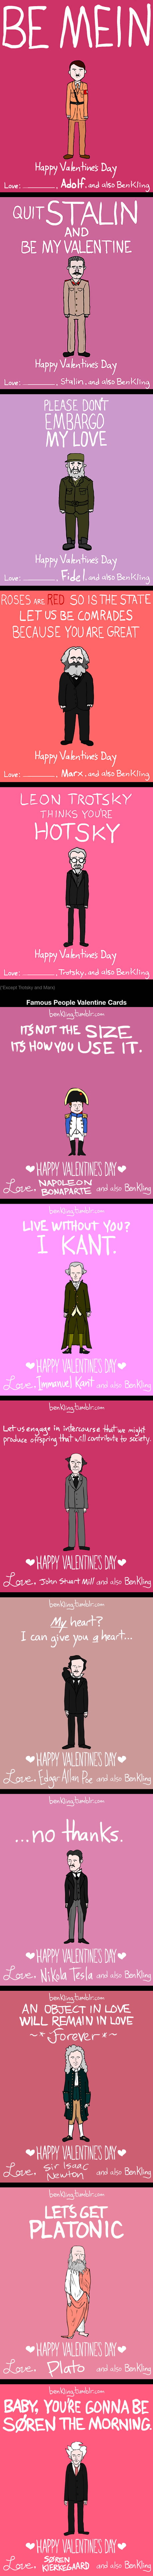 13 Dictator and Famous People Valentine Day Cards (By Ben Kling) - 9GAG